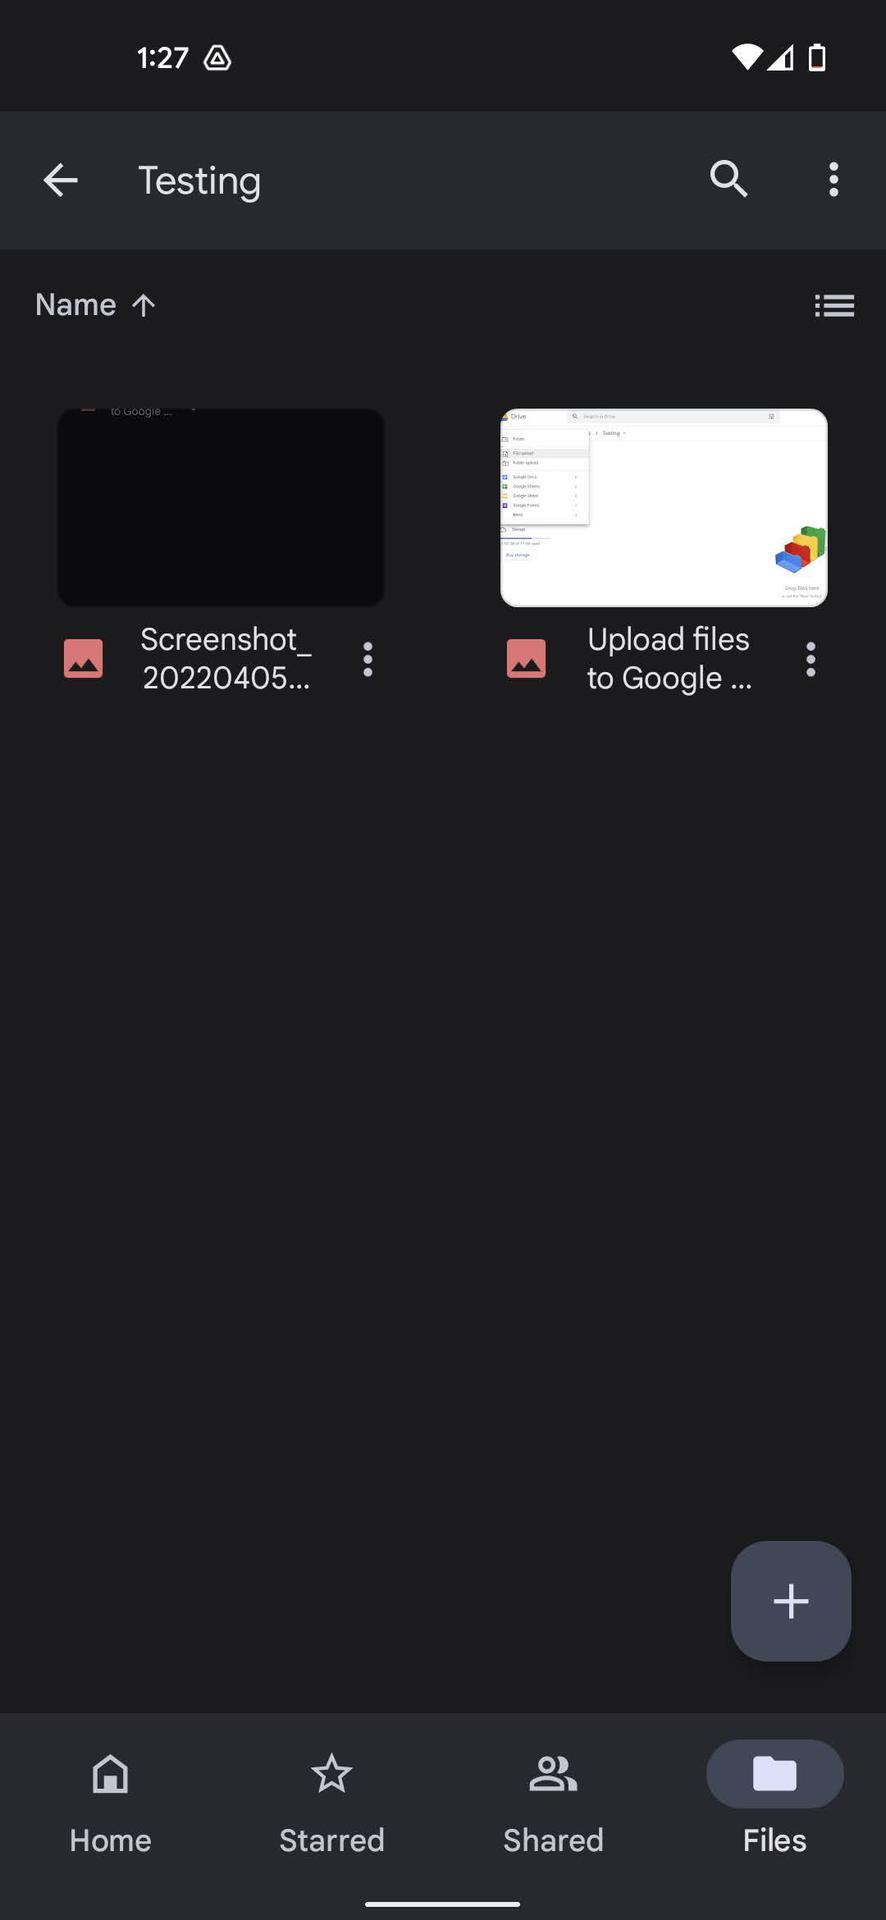 Download files from Google Drive on Android 1